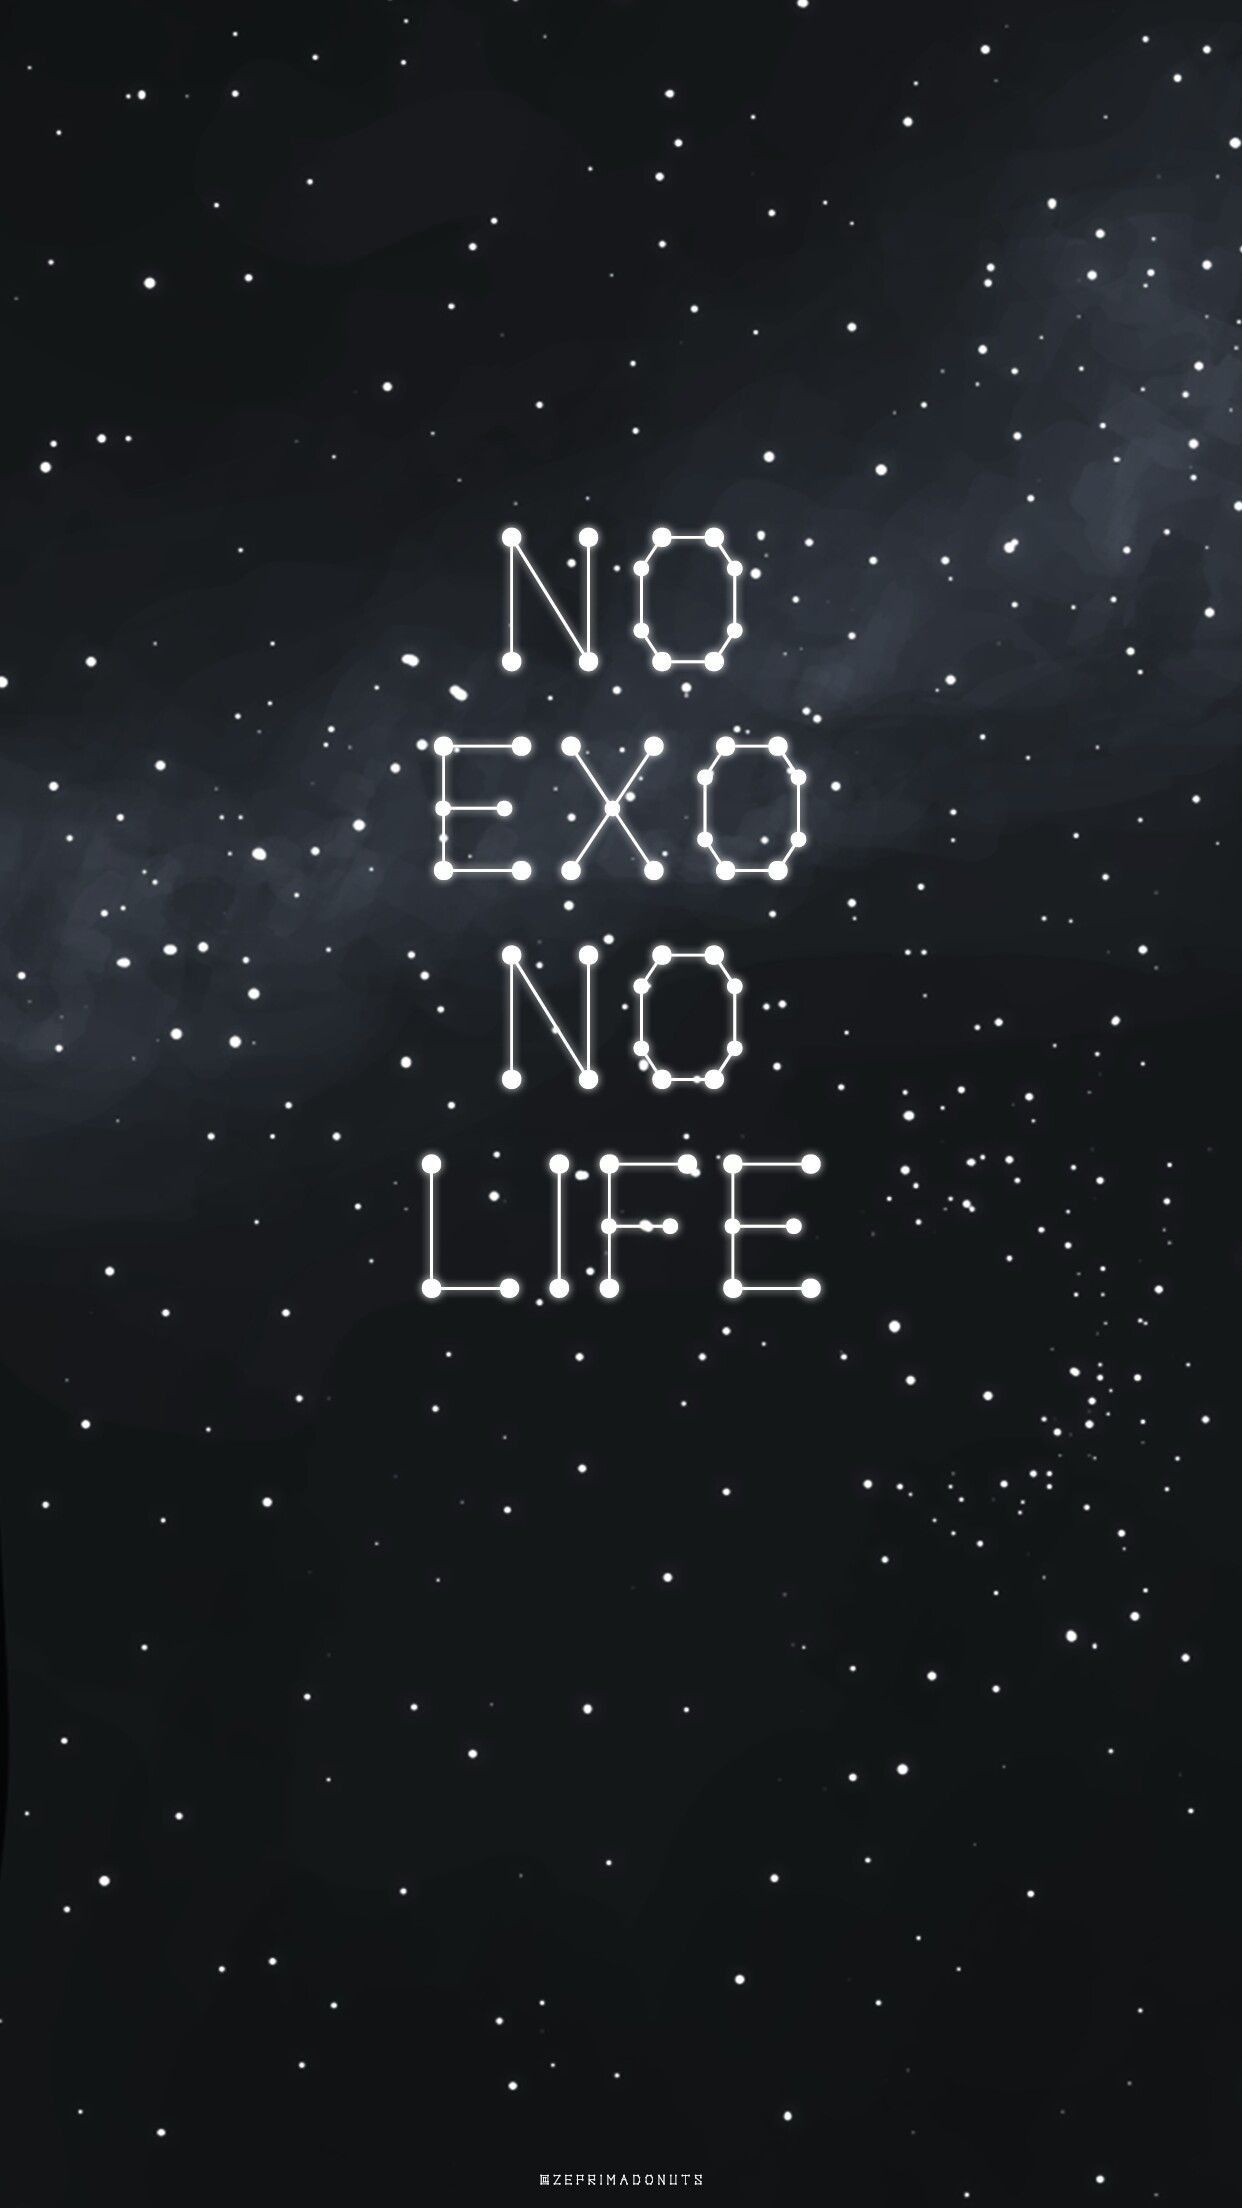 Exo Light Stick Wallpapers On Wallpaperdog This app is only for entertainment. exo light stick wallpapers on wallpaperdog